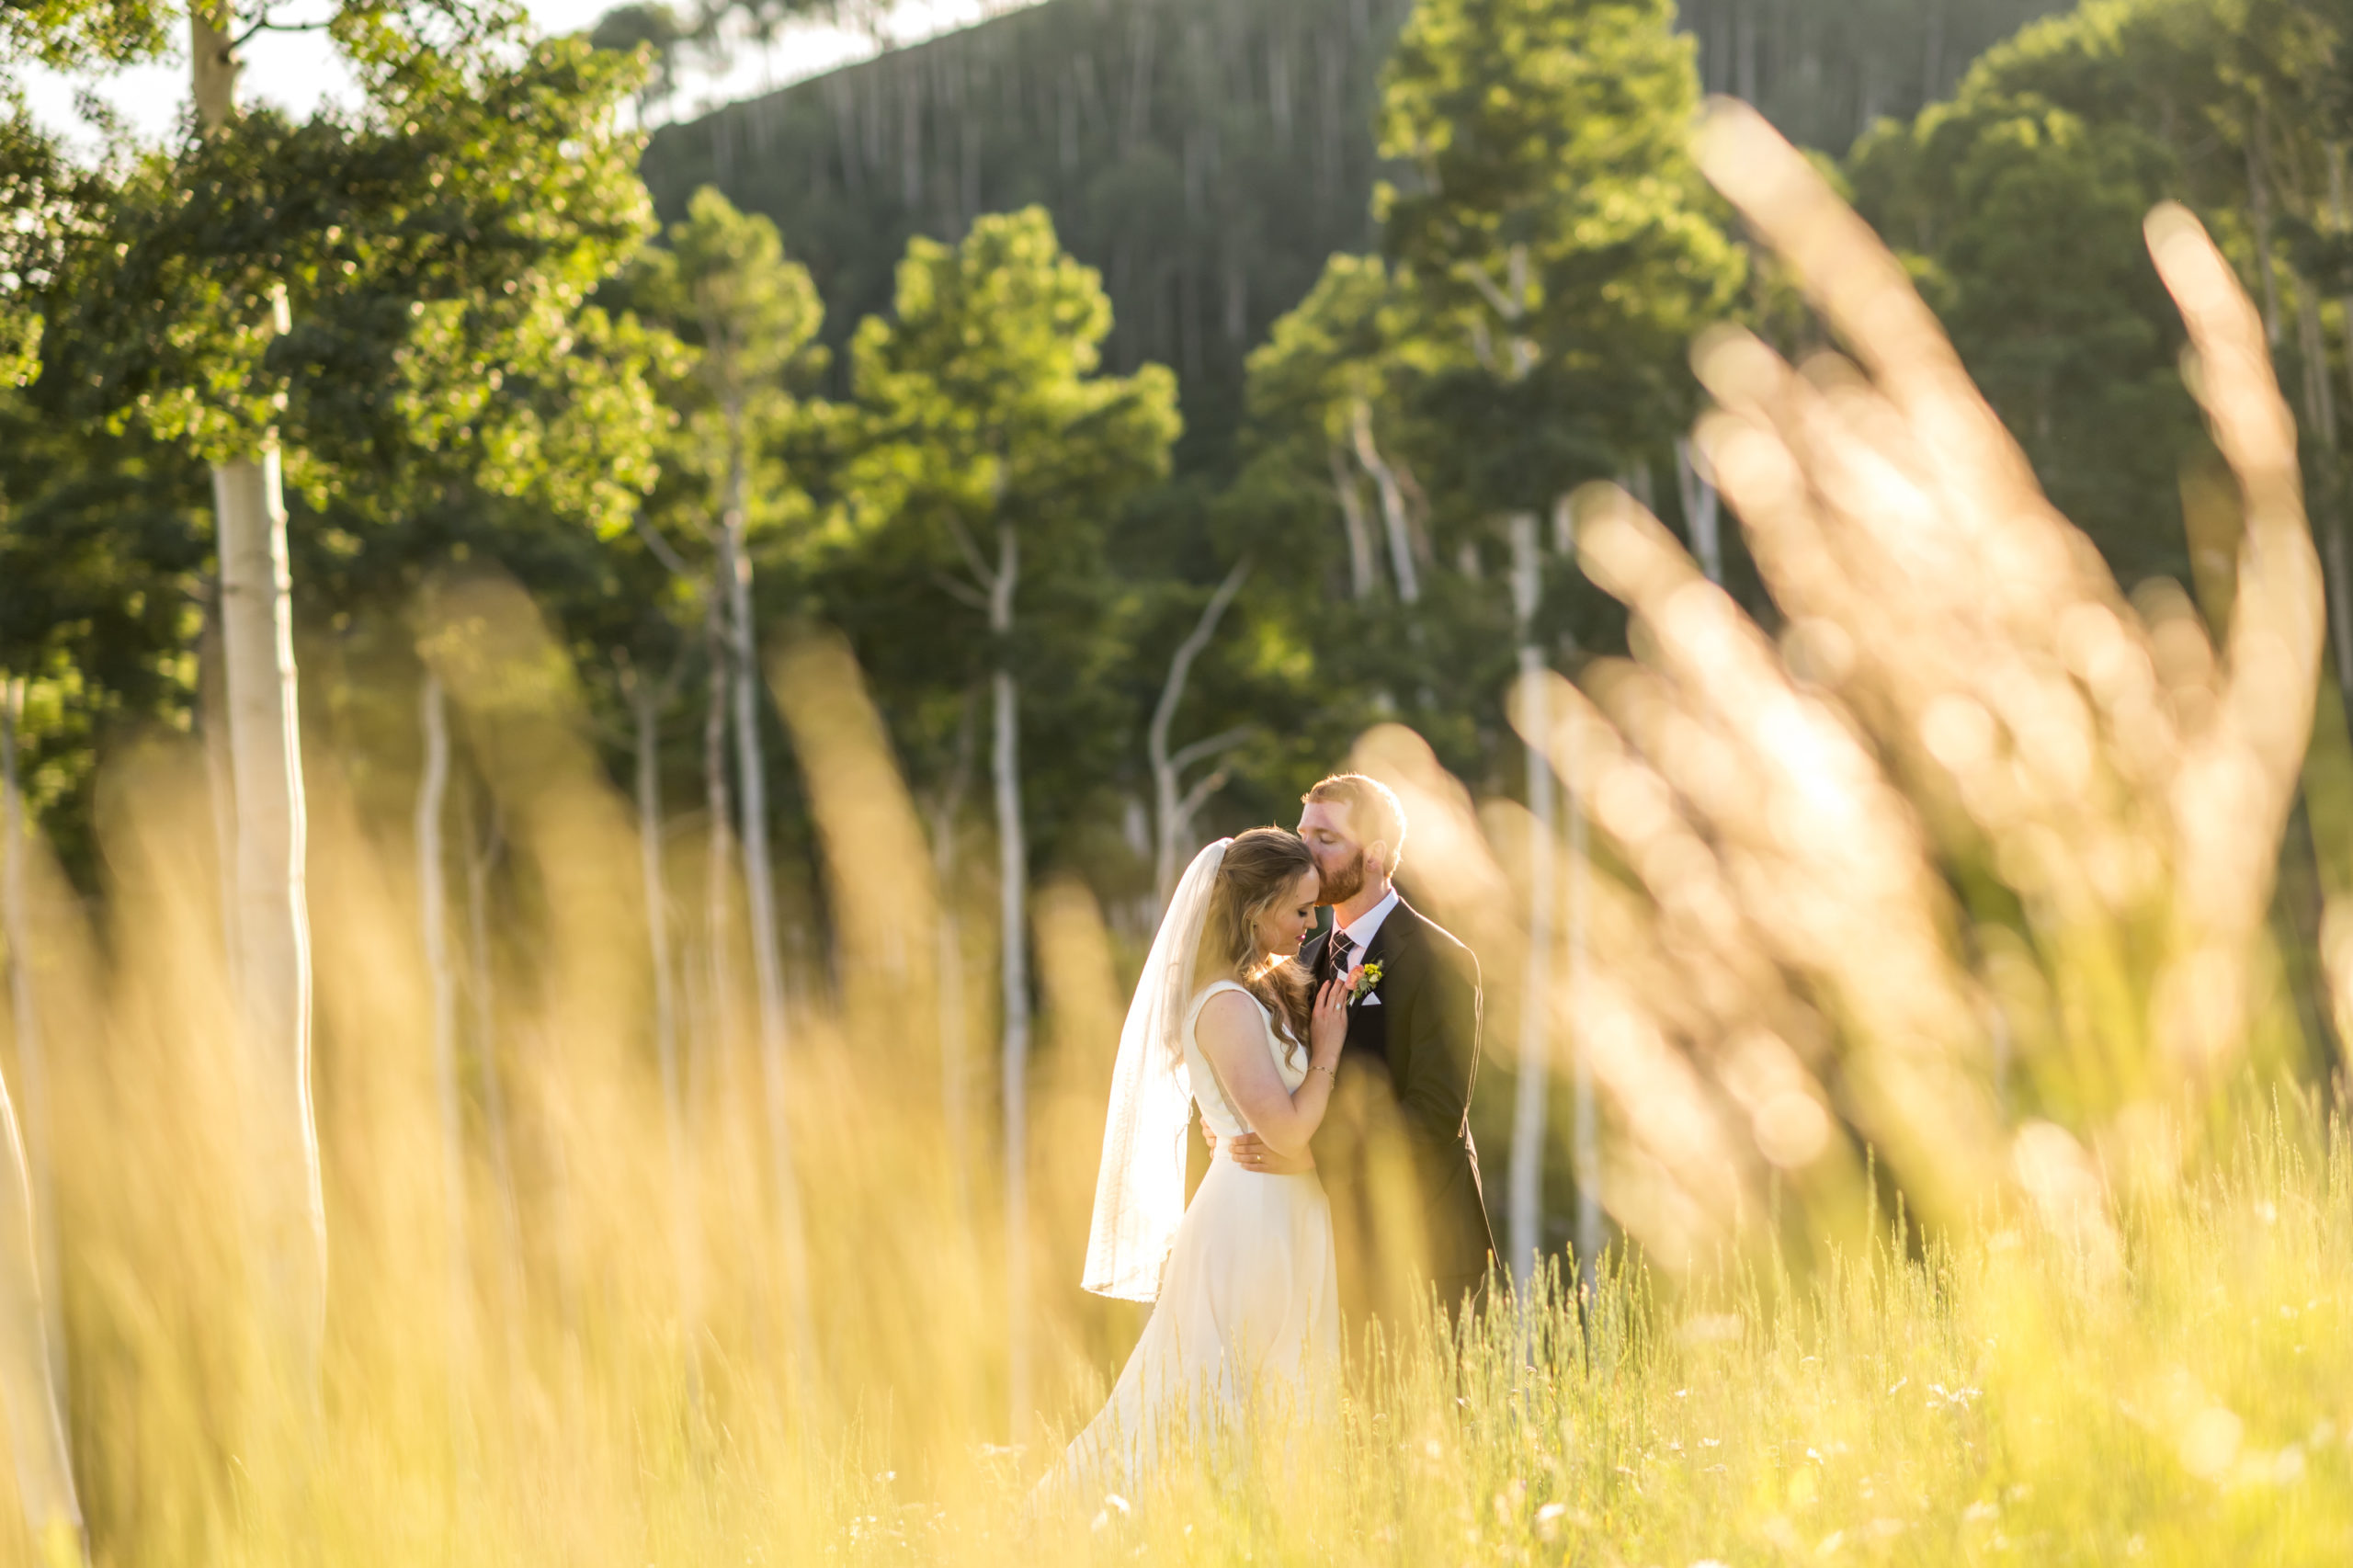 The bride and groom kiss during their Telluride, Colorado, wedding.